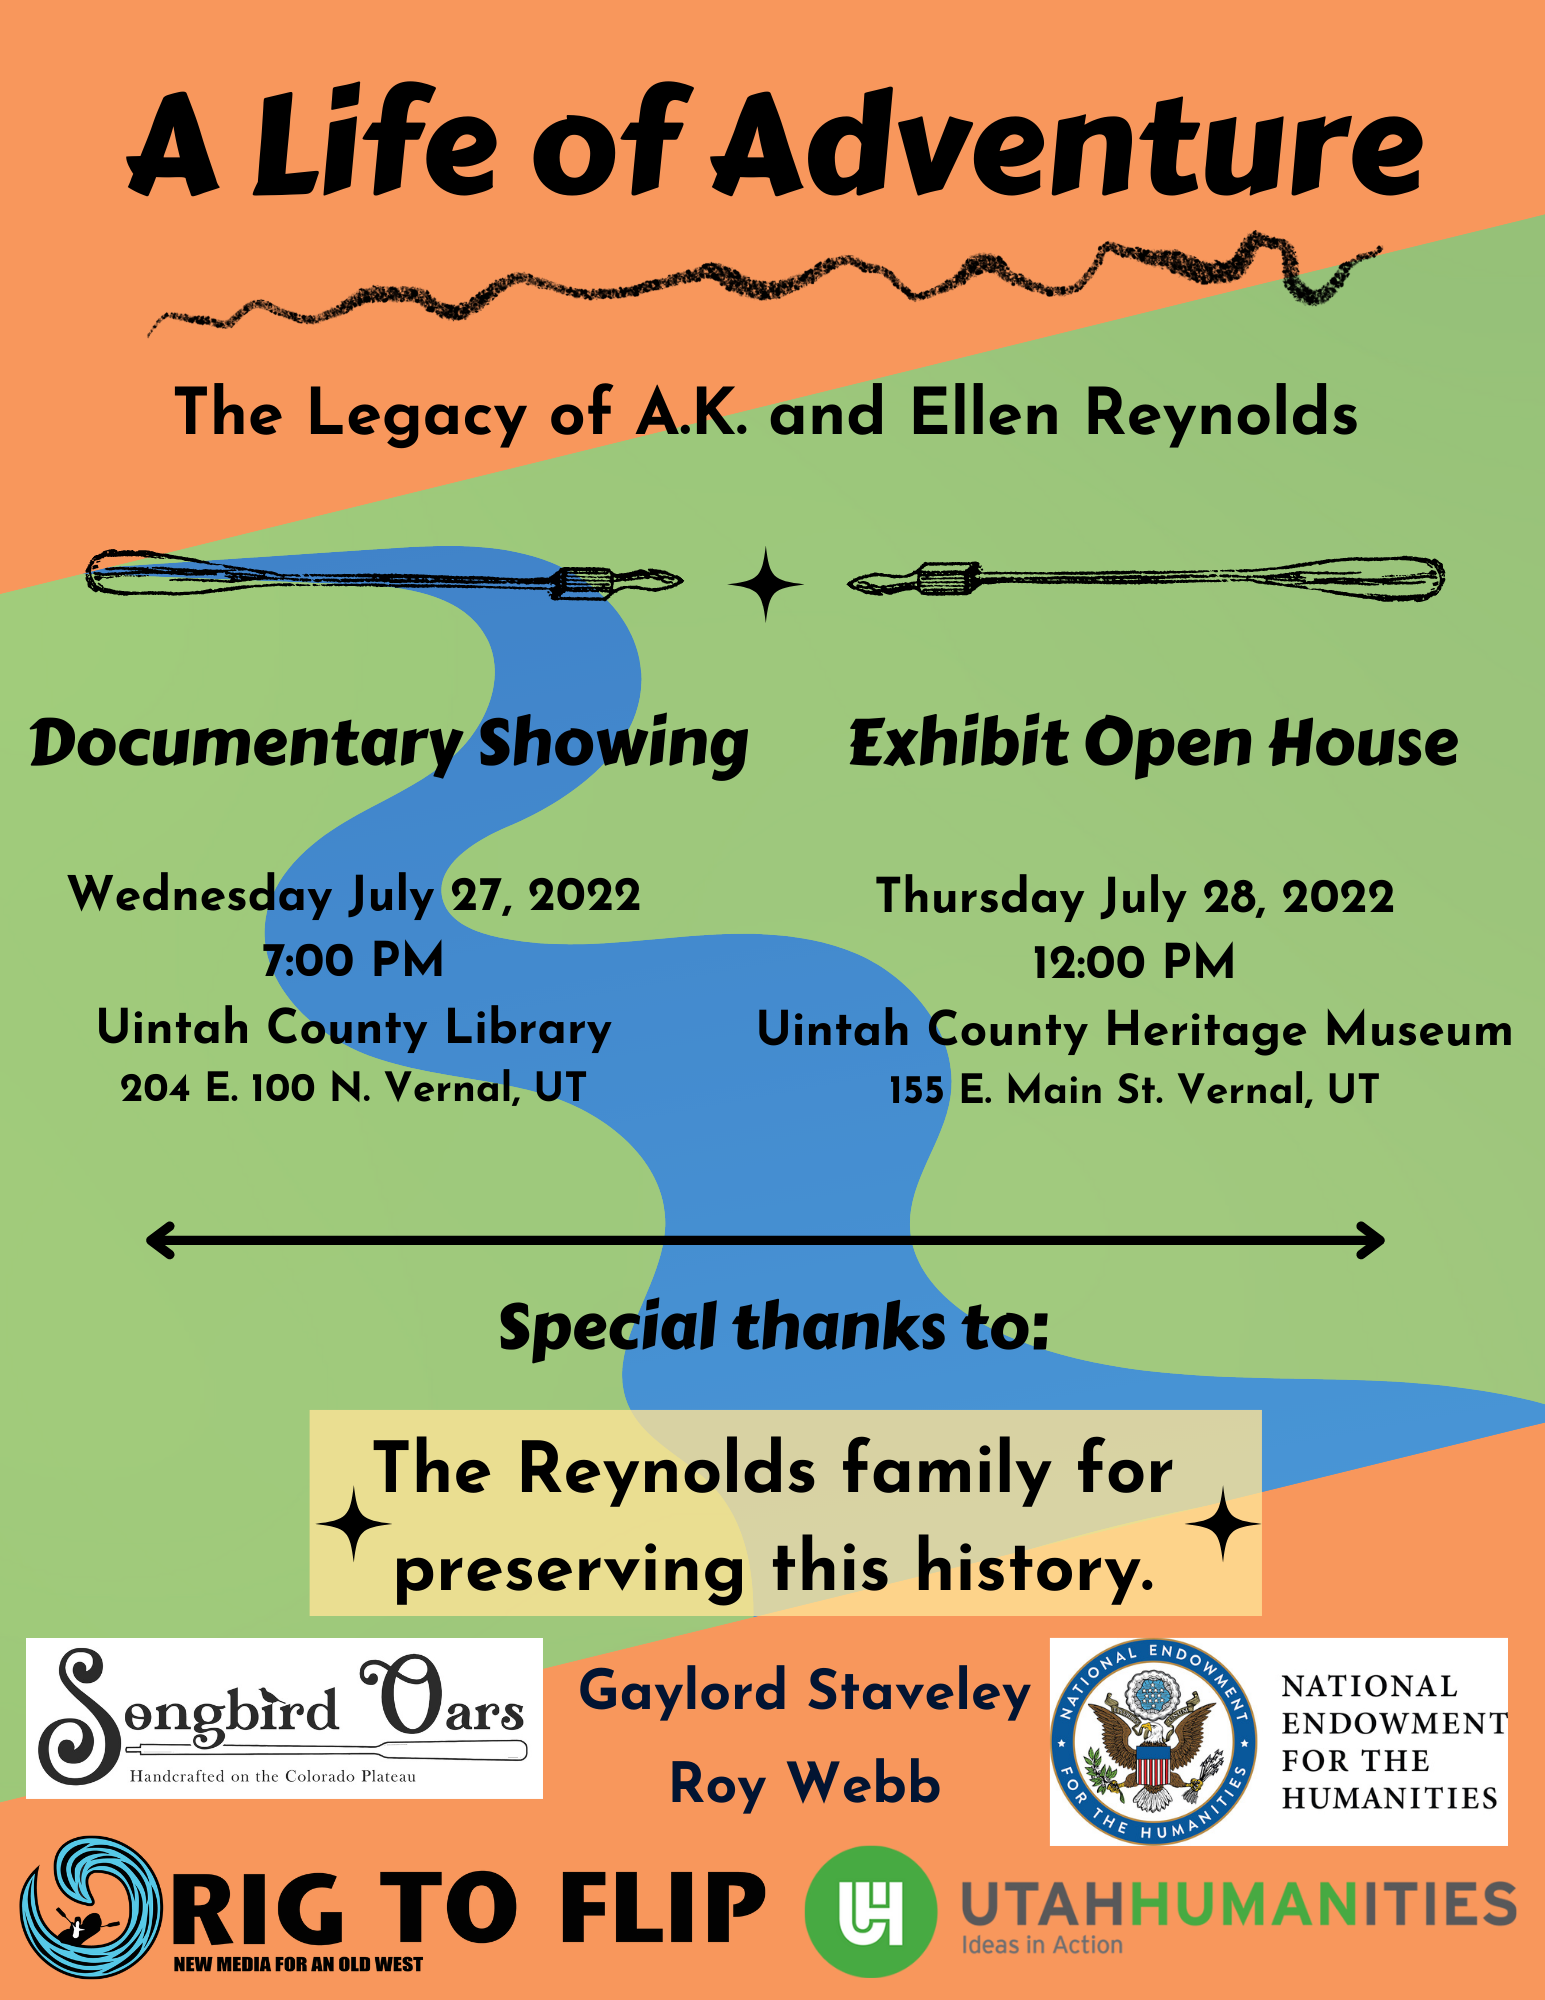 Orange and green background with blue river; text: "A Life of Adventure | The Legacy of A.K. and Ellen Reynolds | Documentary Showing | Wednesday July 27, 2022 | 7:00 pm | Uintah County Library | 204 E 100 N Vernal, UT | Exhibit Open House | Thursday July 28, 2022 | 12:00 pm | Uintah County Heritage Museum | 155 E. Main St. Vernal, UT | Special thanks to The Reynolds family for preserving this history. | Gaylord Staveley | Roy Webb"" Logos